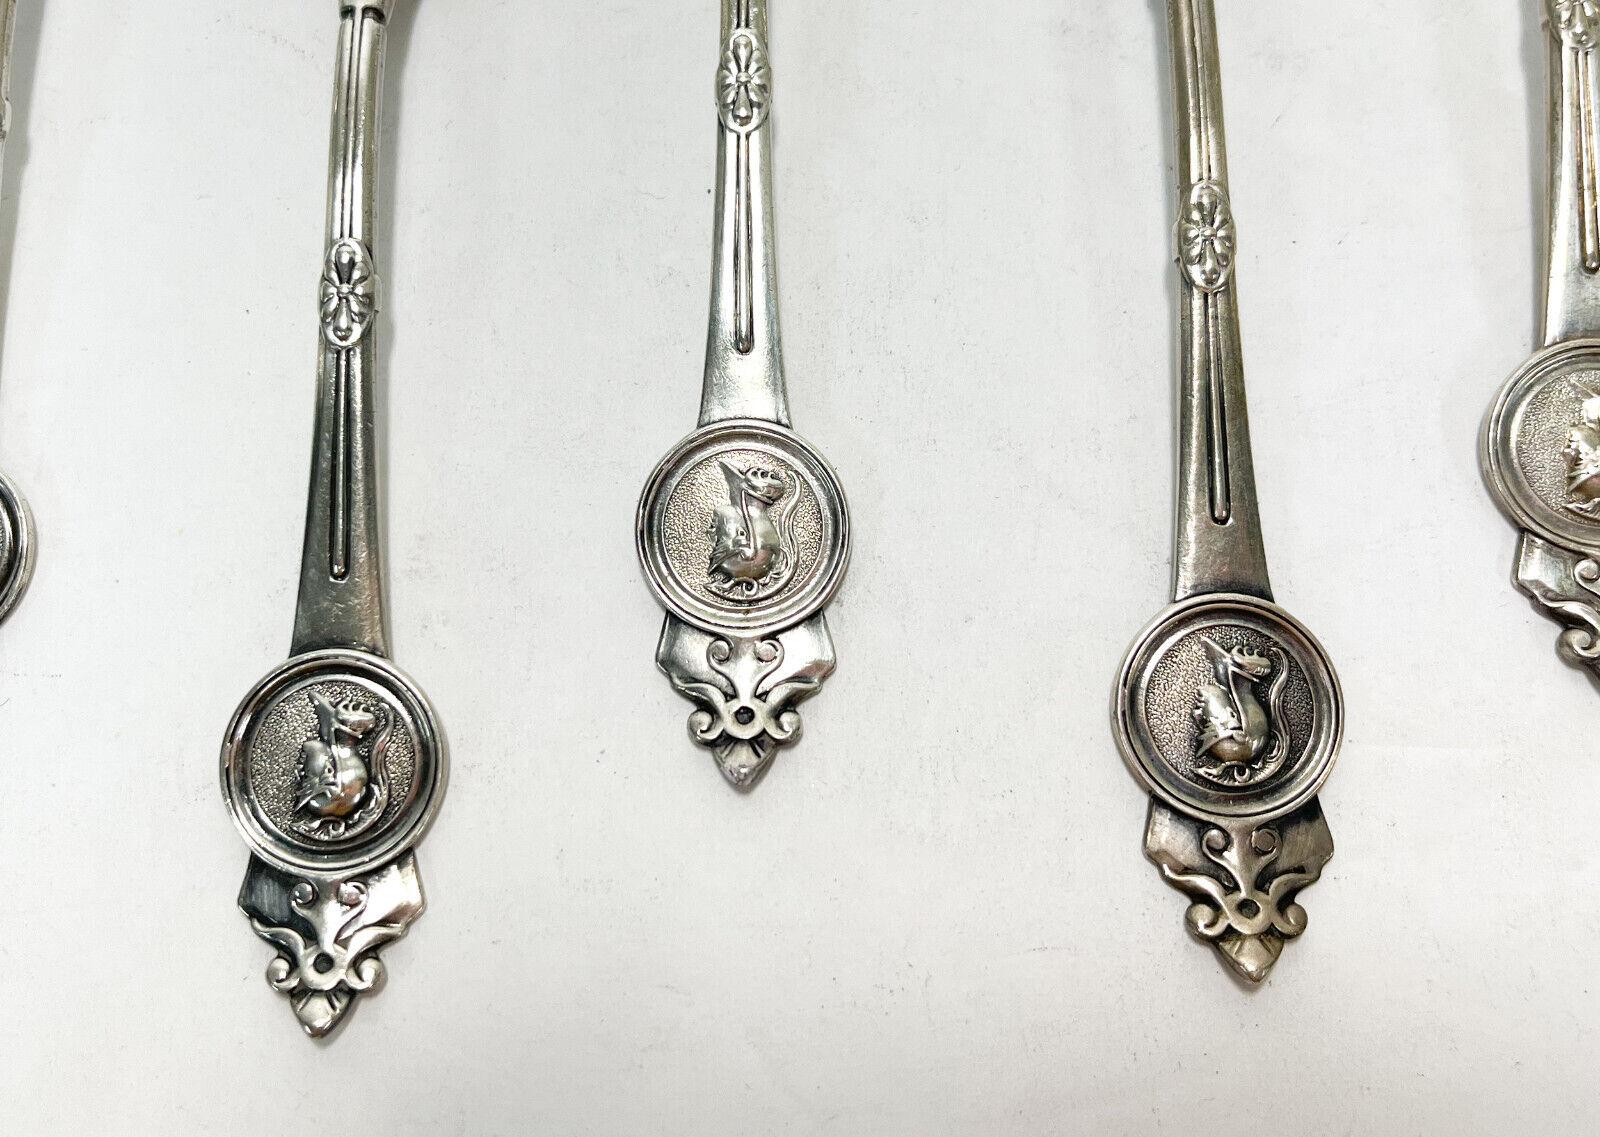  9 Gorham sterling silver medallion teaspoons, Late 19th Century. Etched flowers with an etched warrior figure to the finial. Gorham hallmark to the verso handle.

Additional Information: 
Type: Teaspoons
Weight Approx., 7.8 ozt
Dimension:  6 inches